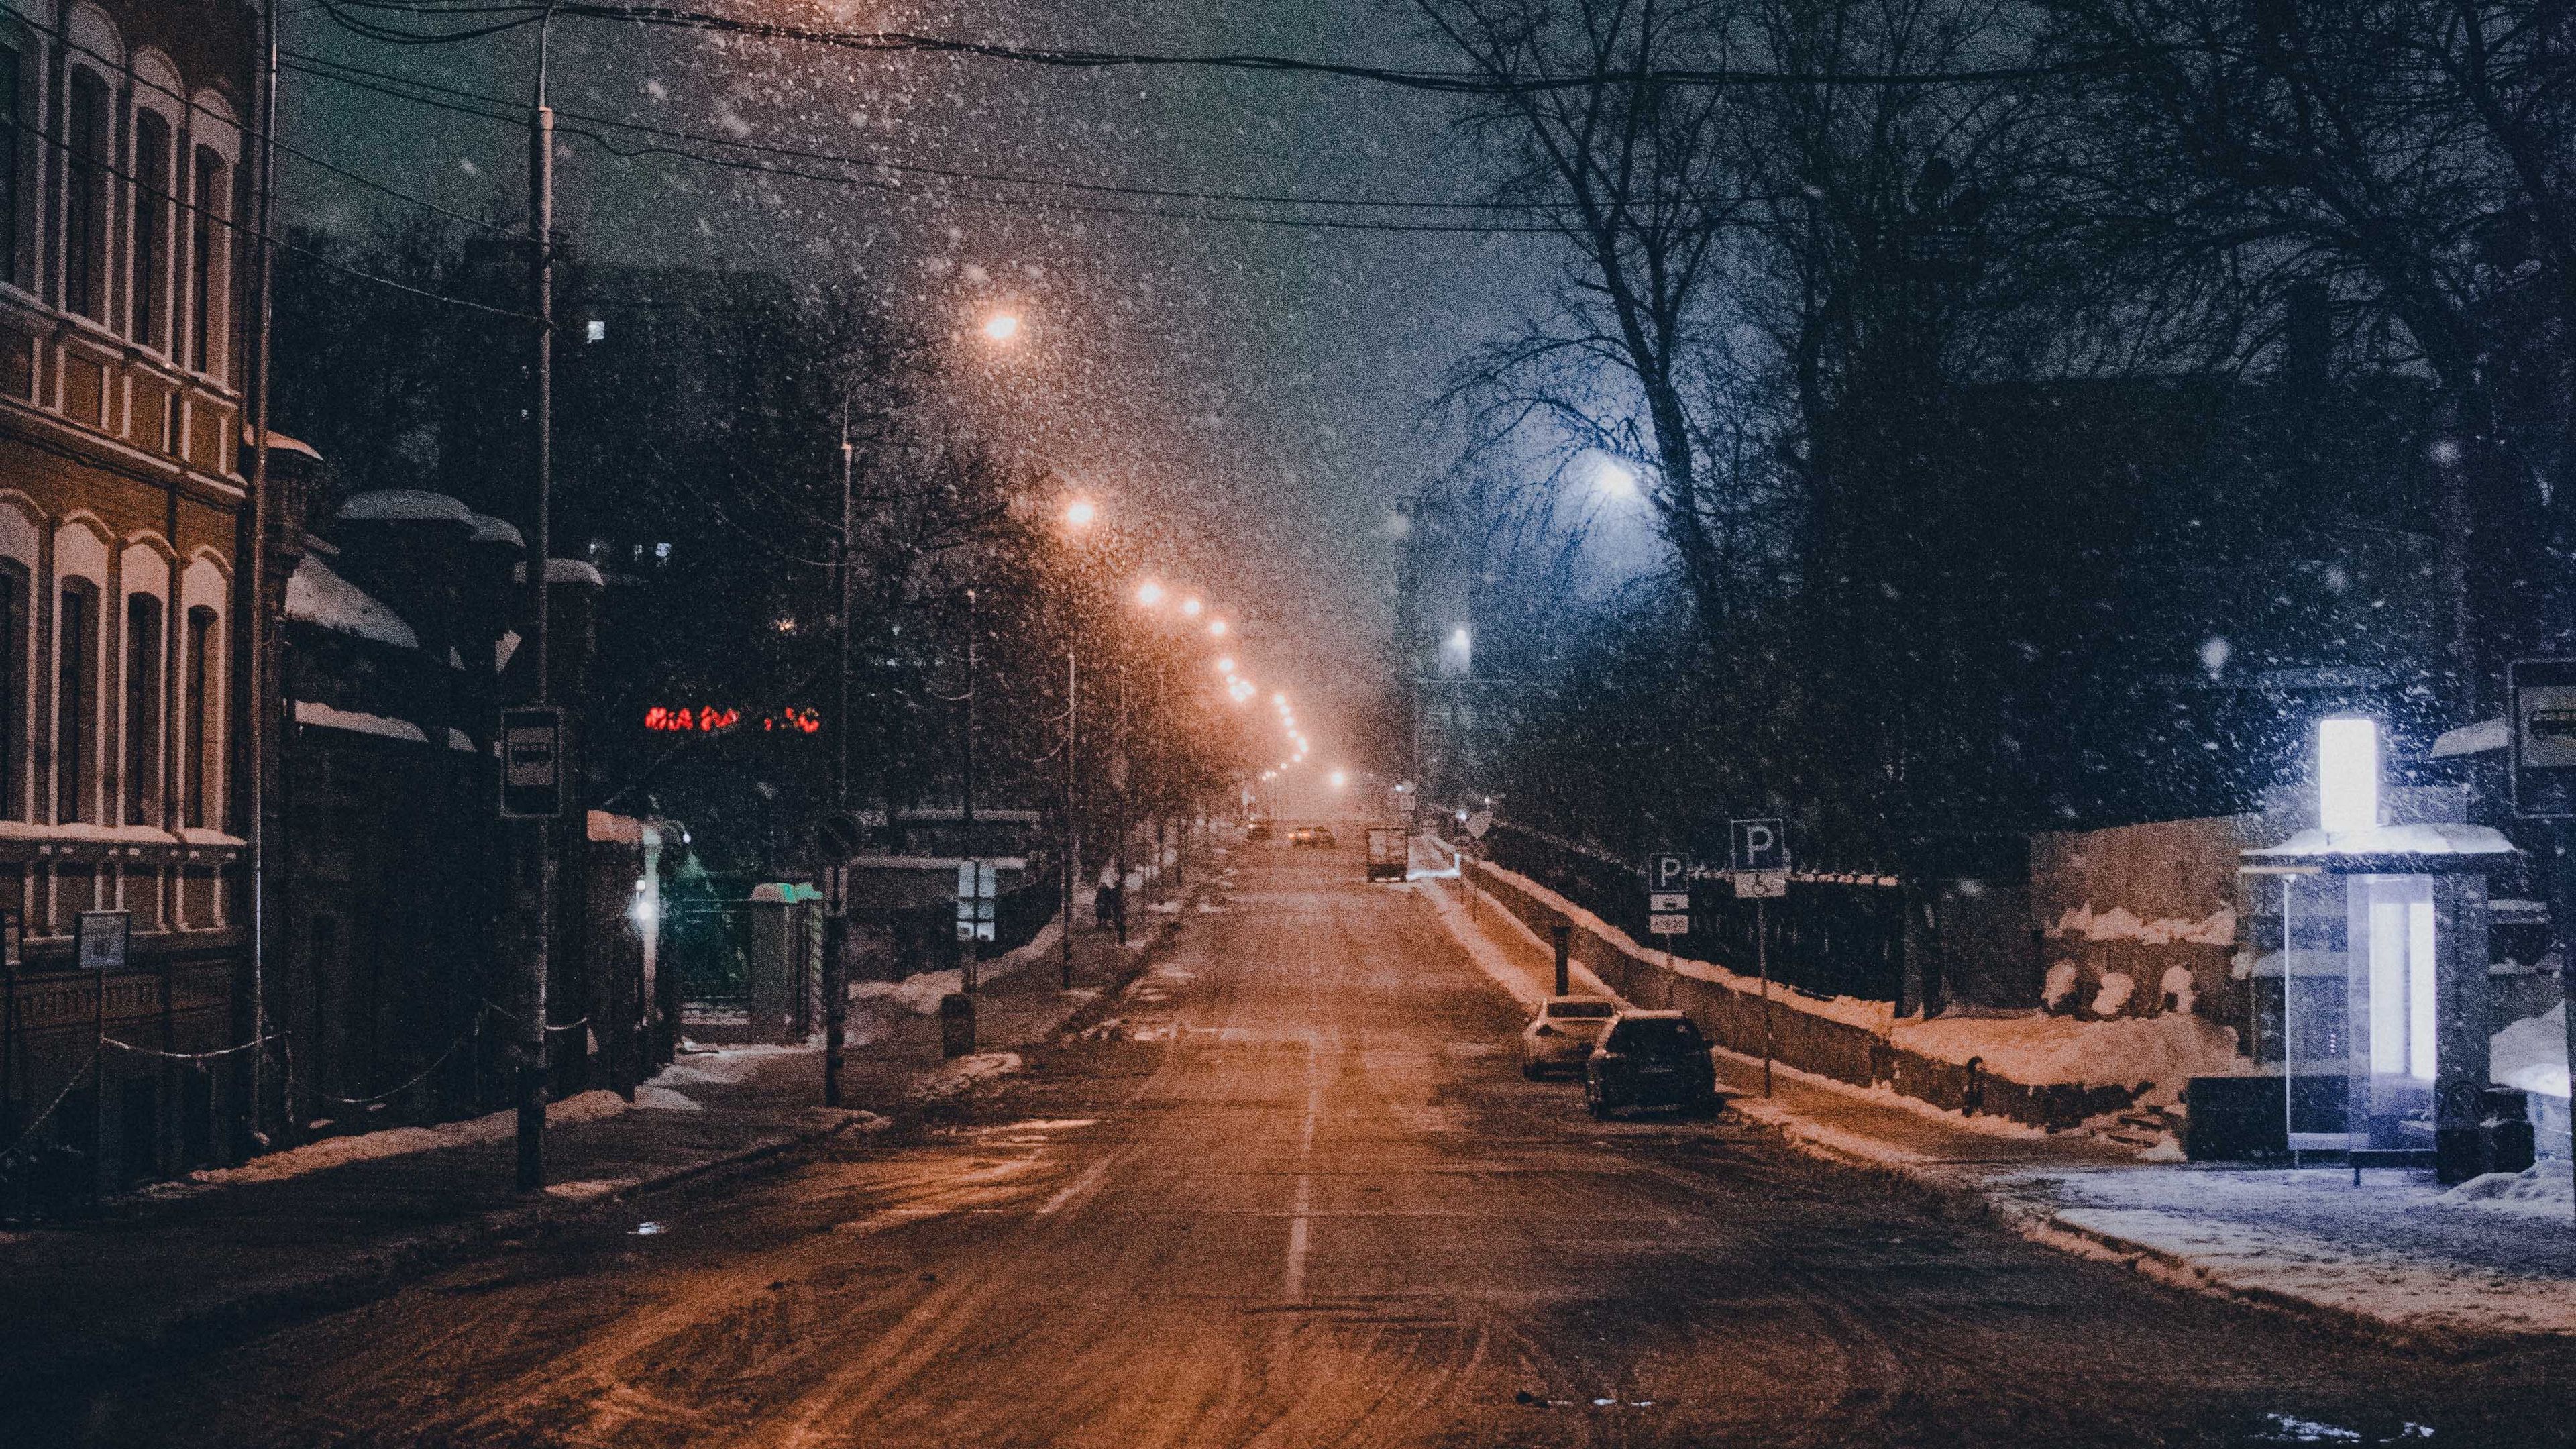 Download wallpapers 3840x2160 night city, road, snowfall, winter, twilight 4k uhd 16:9 hd backgrounds